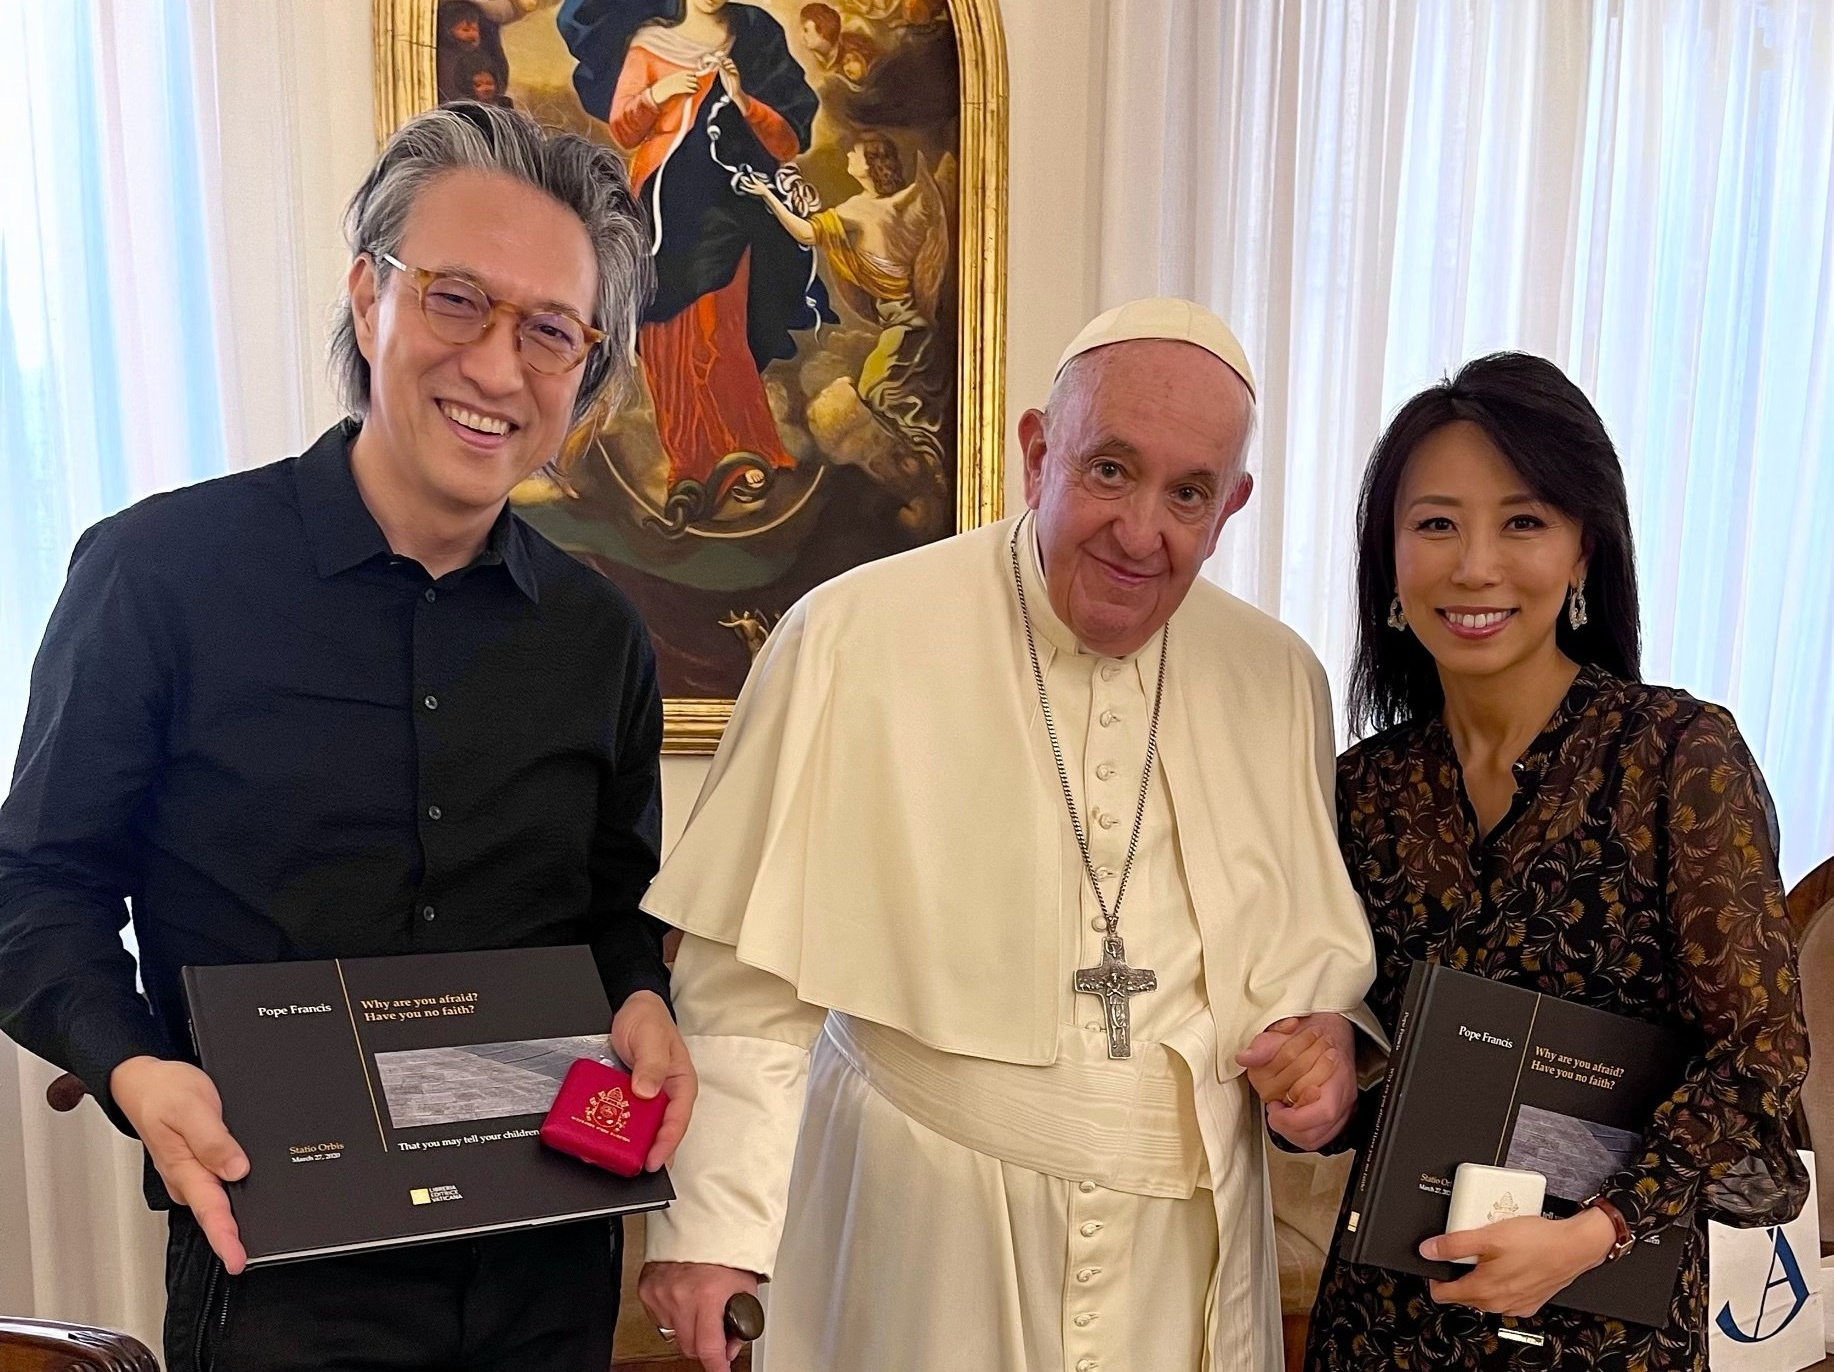 Embers Meeting with Pope Francis